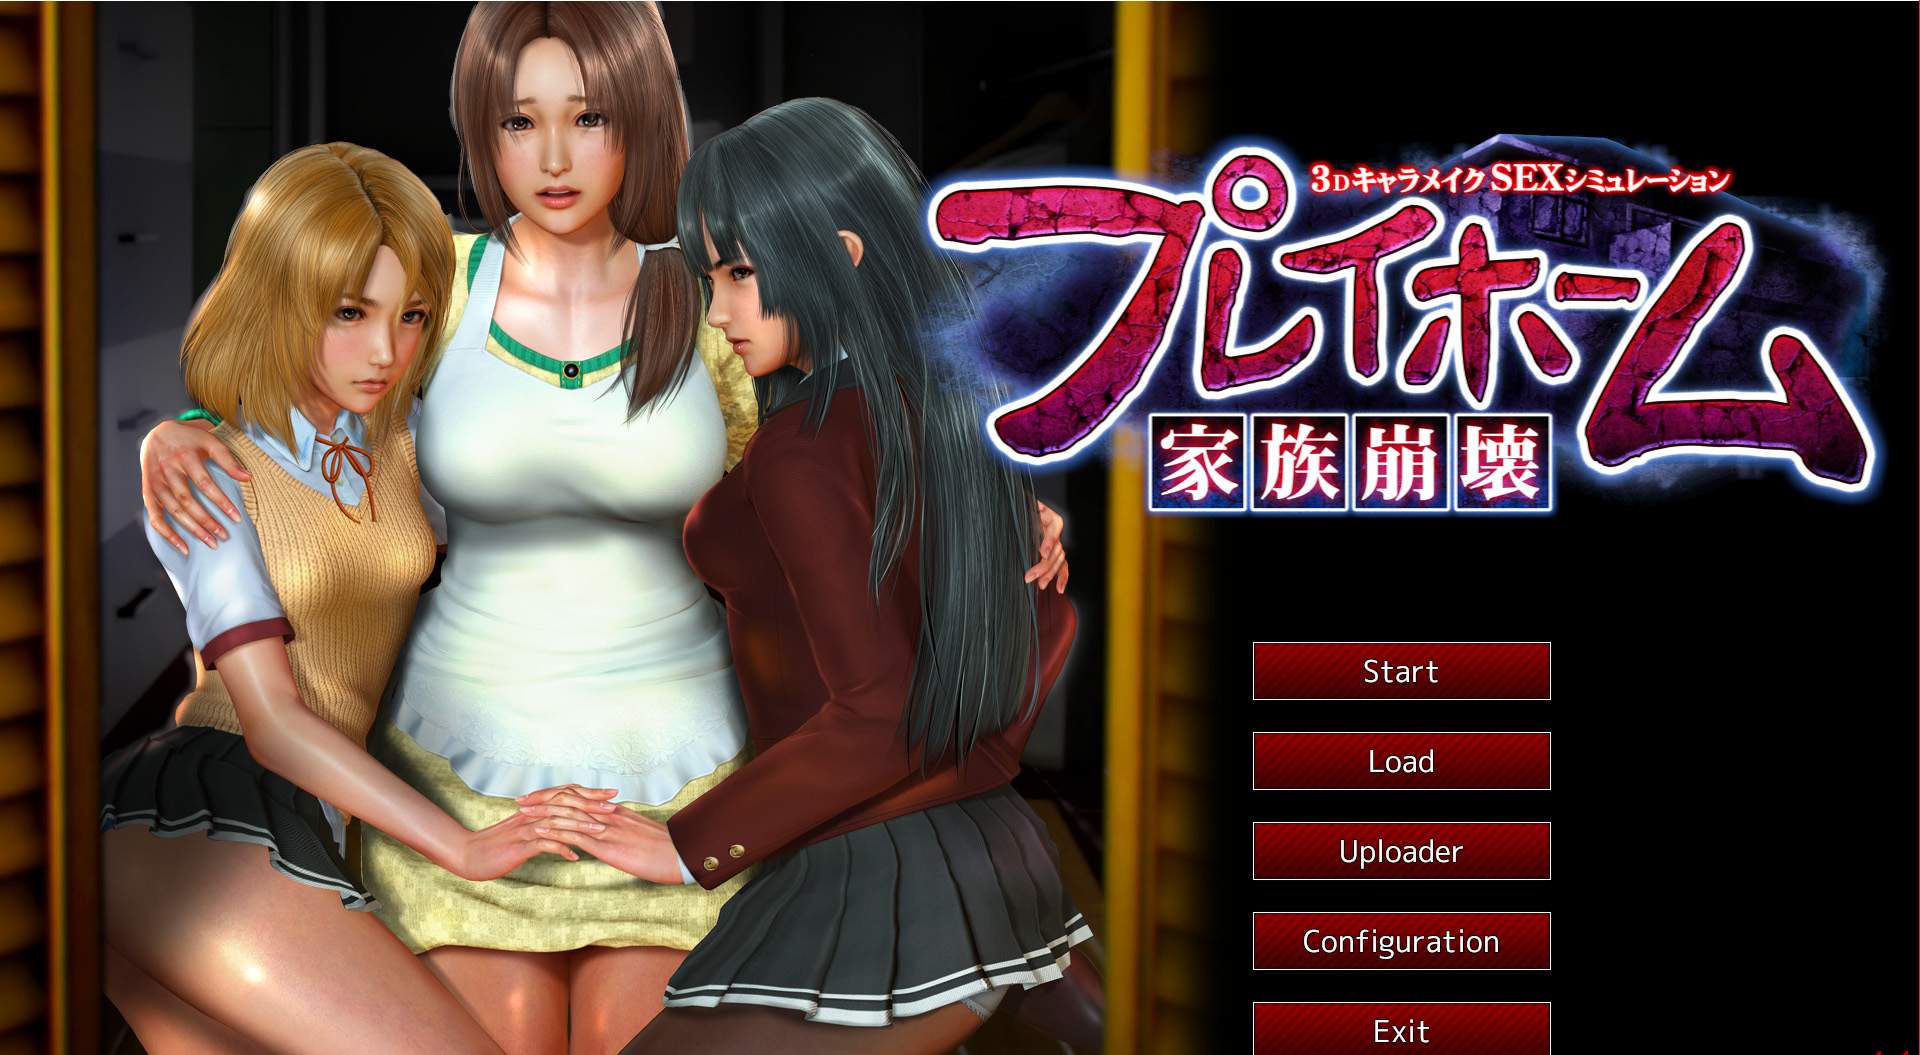 Play Home (Illusion) " Download Hentai Games.